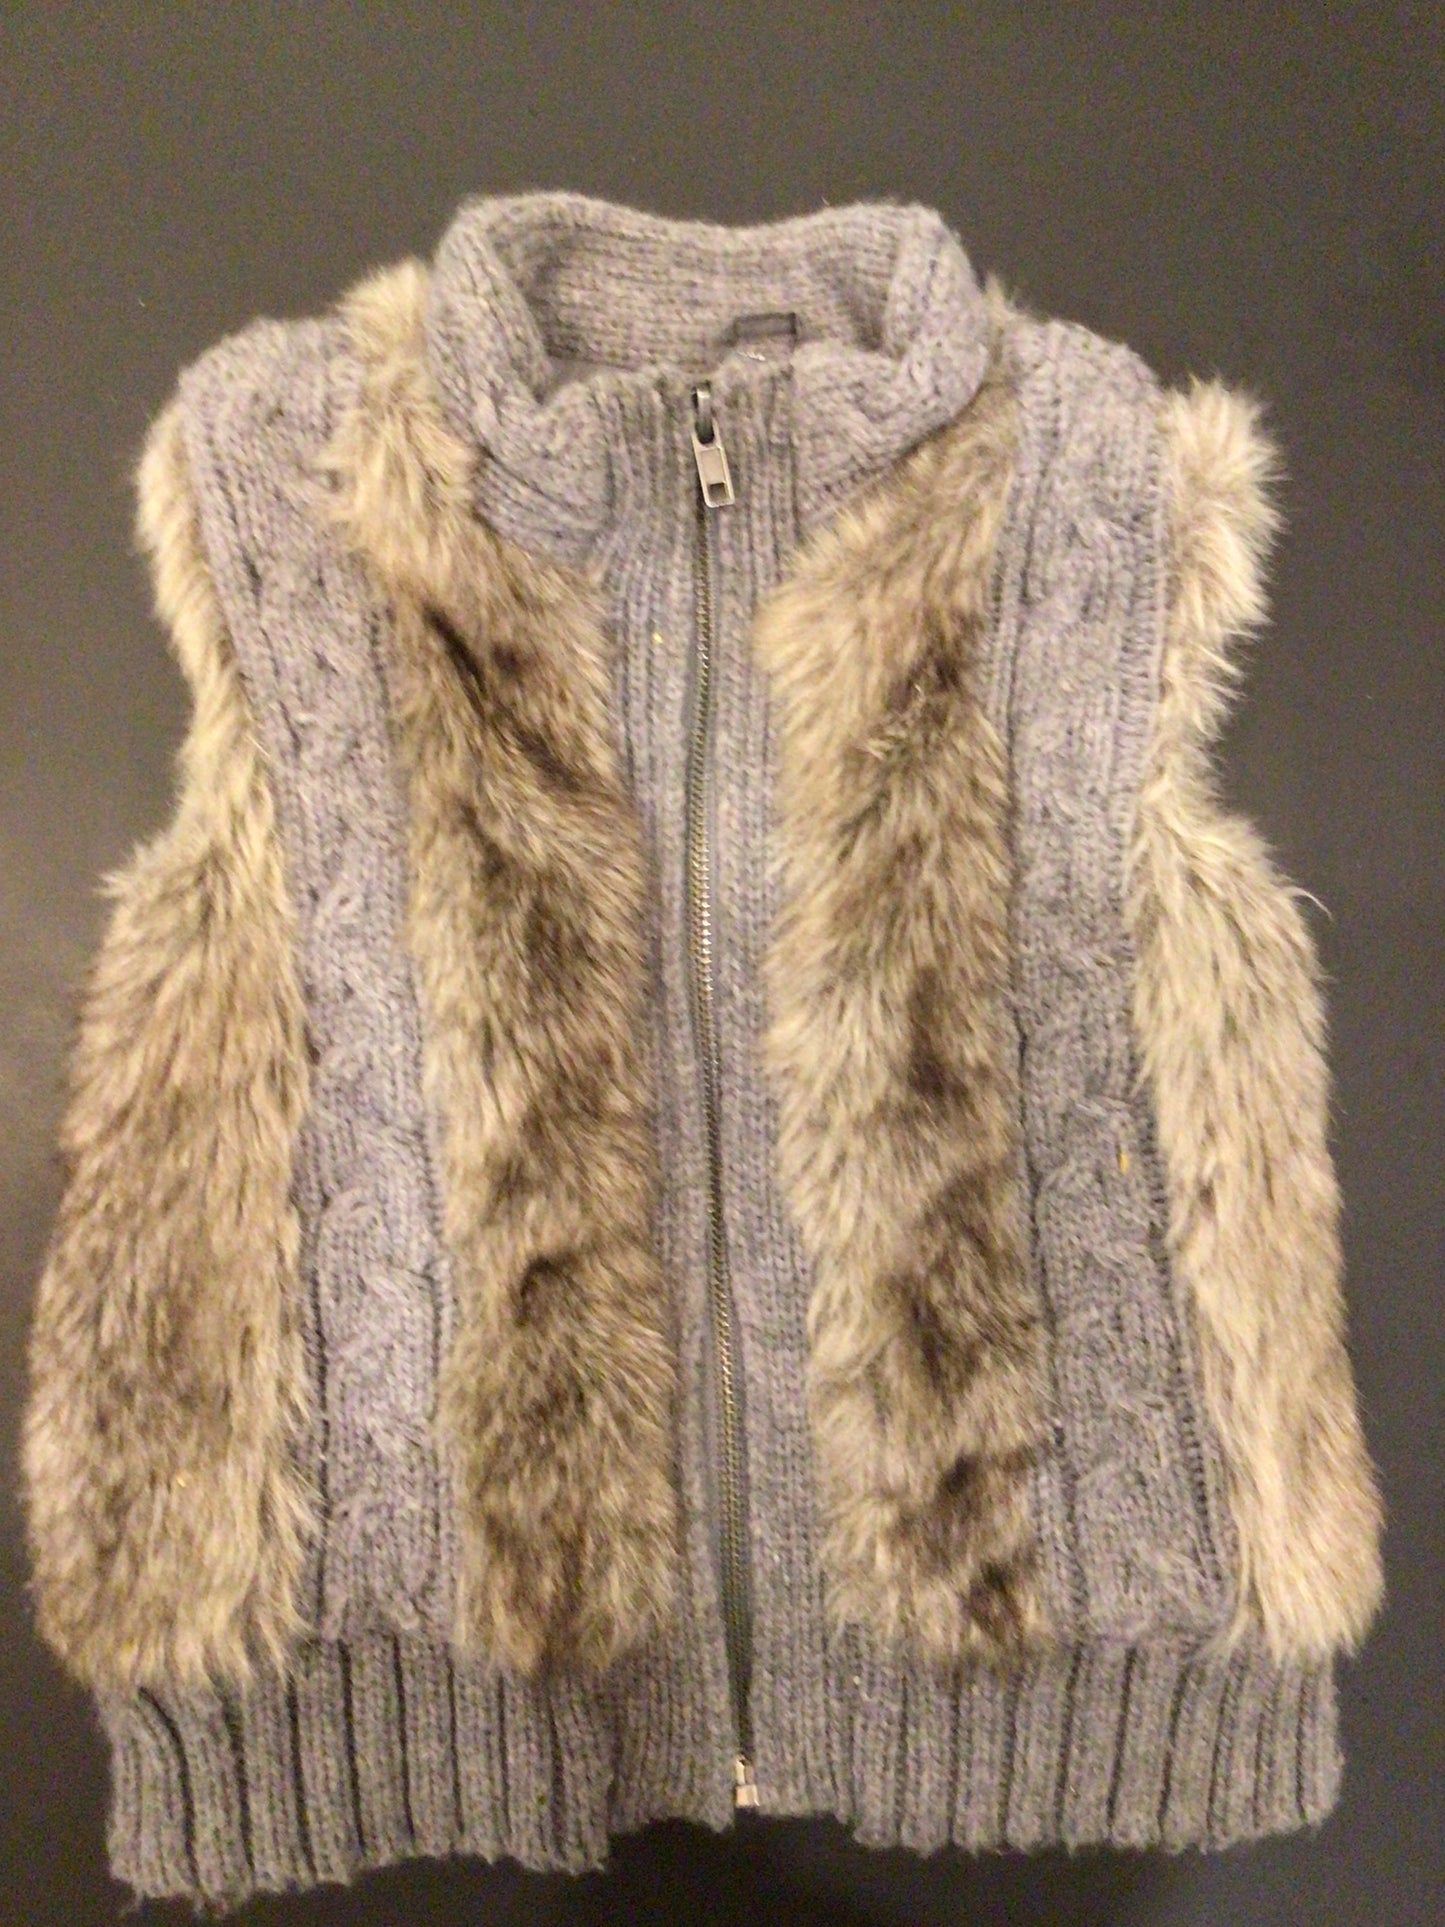 Consignment 4475-02 Zara Girls Collection. Toddlers grey fur/knitted vest. Size XXS.